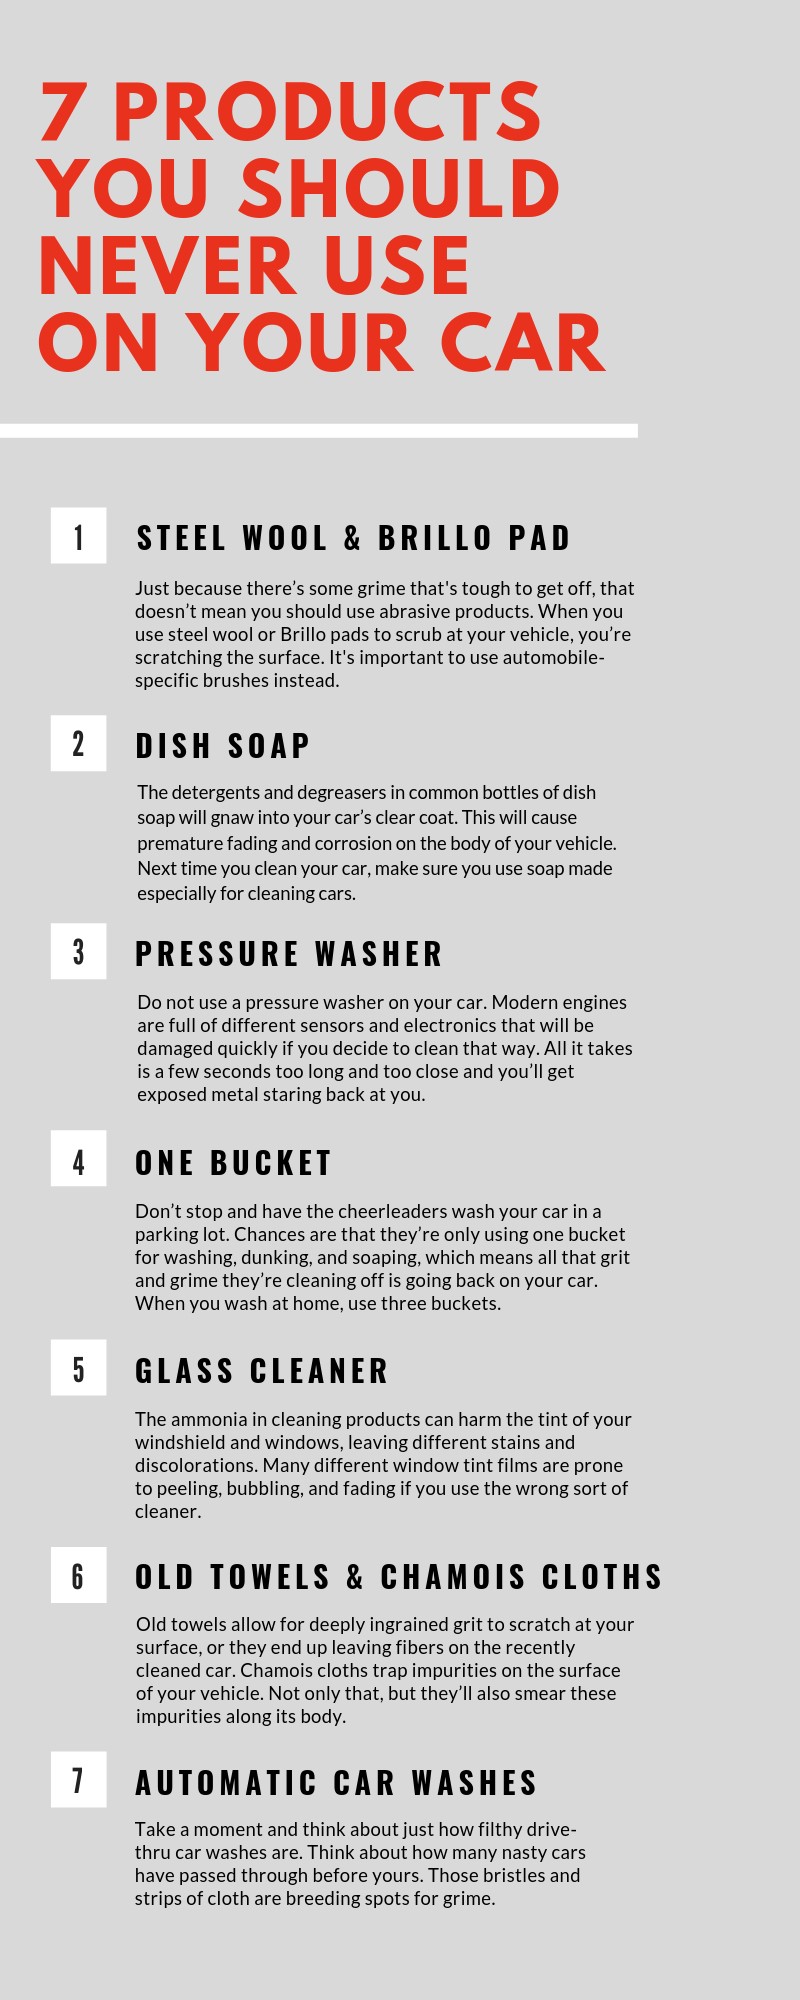 7 DIY Car Wash Supplies for Your Vehicle